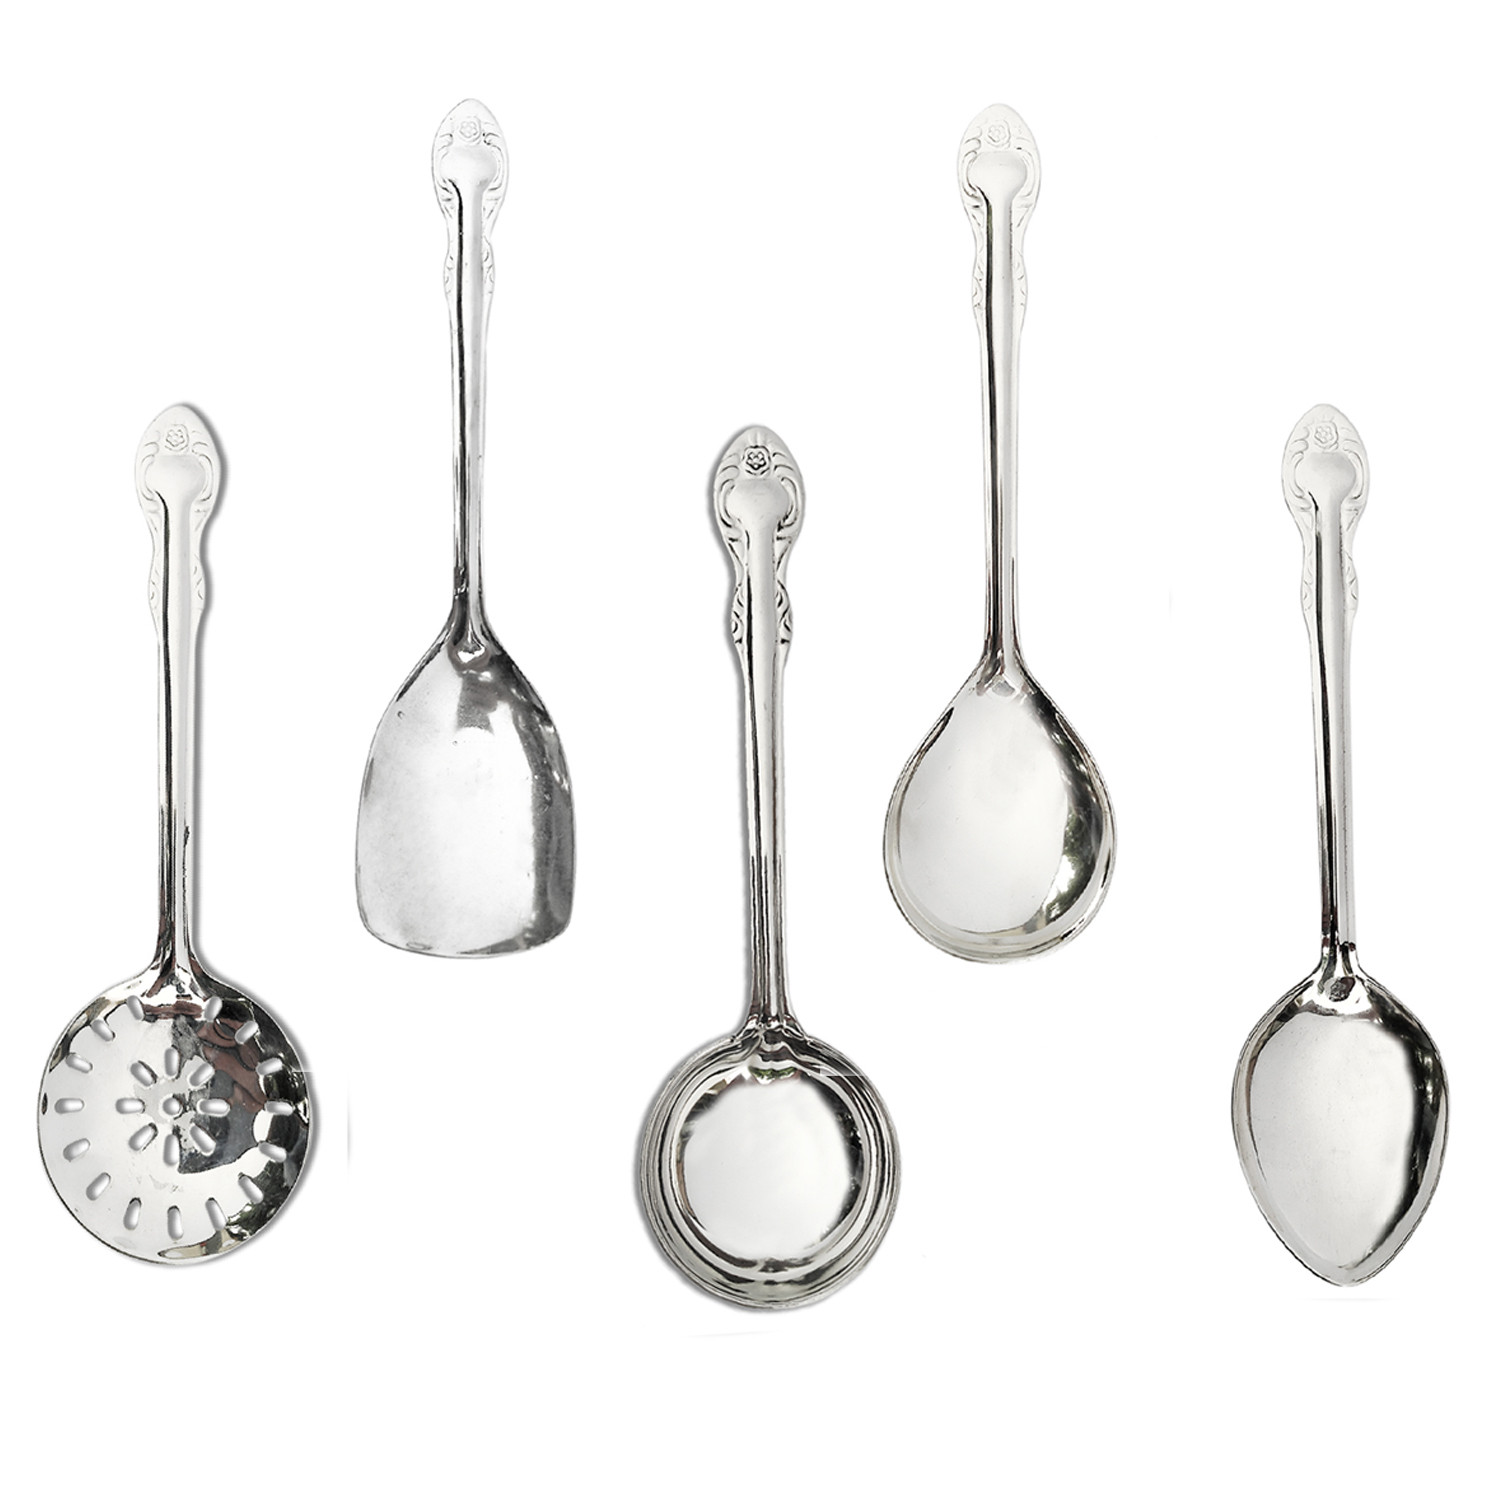 Kuber Industries Heavy Stainless Steel Skimmer|Serving Spoon|Wok Spatula|Solid Spoon|Ladle For Cooking, Frying, Stirring, Basting, Set of 5 (Silver)